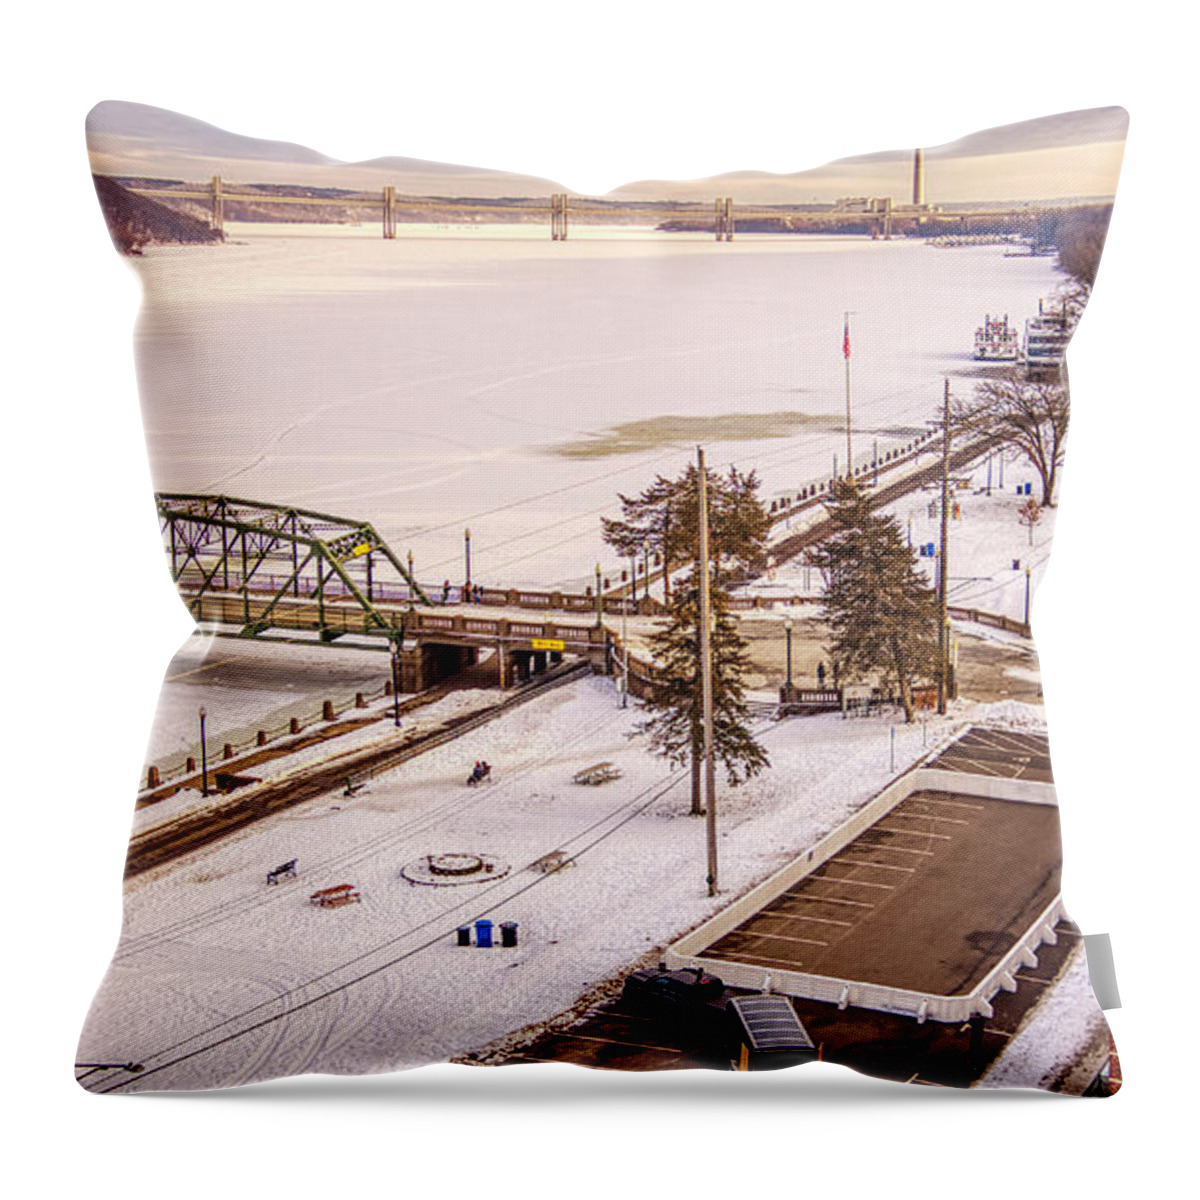 Sunset Throw Pillow featuring the photograph Frozen St Croix River Downtown Wintertime in Stillwater Minnesota Downtown Lights by Greg Schulz Pictures Over Stillwater